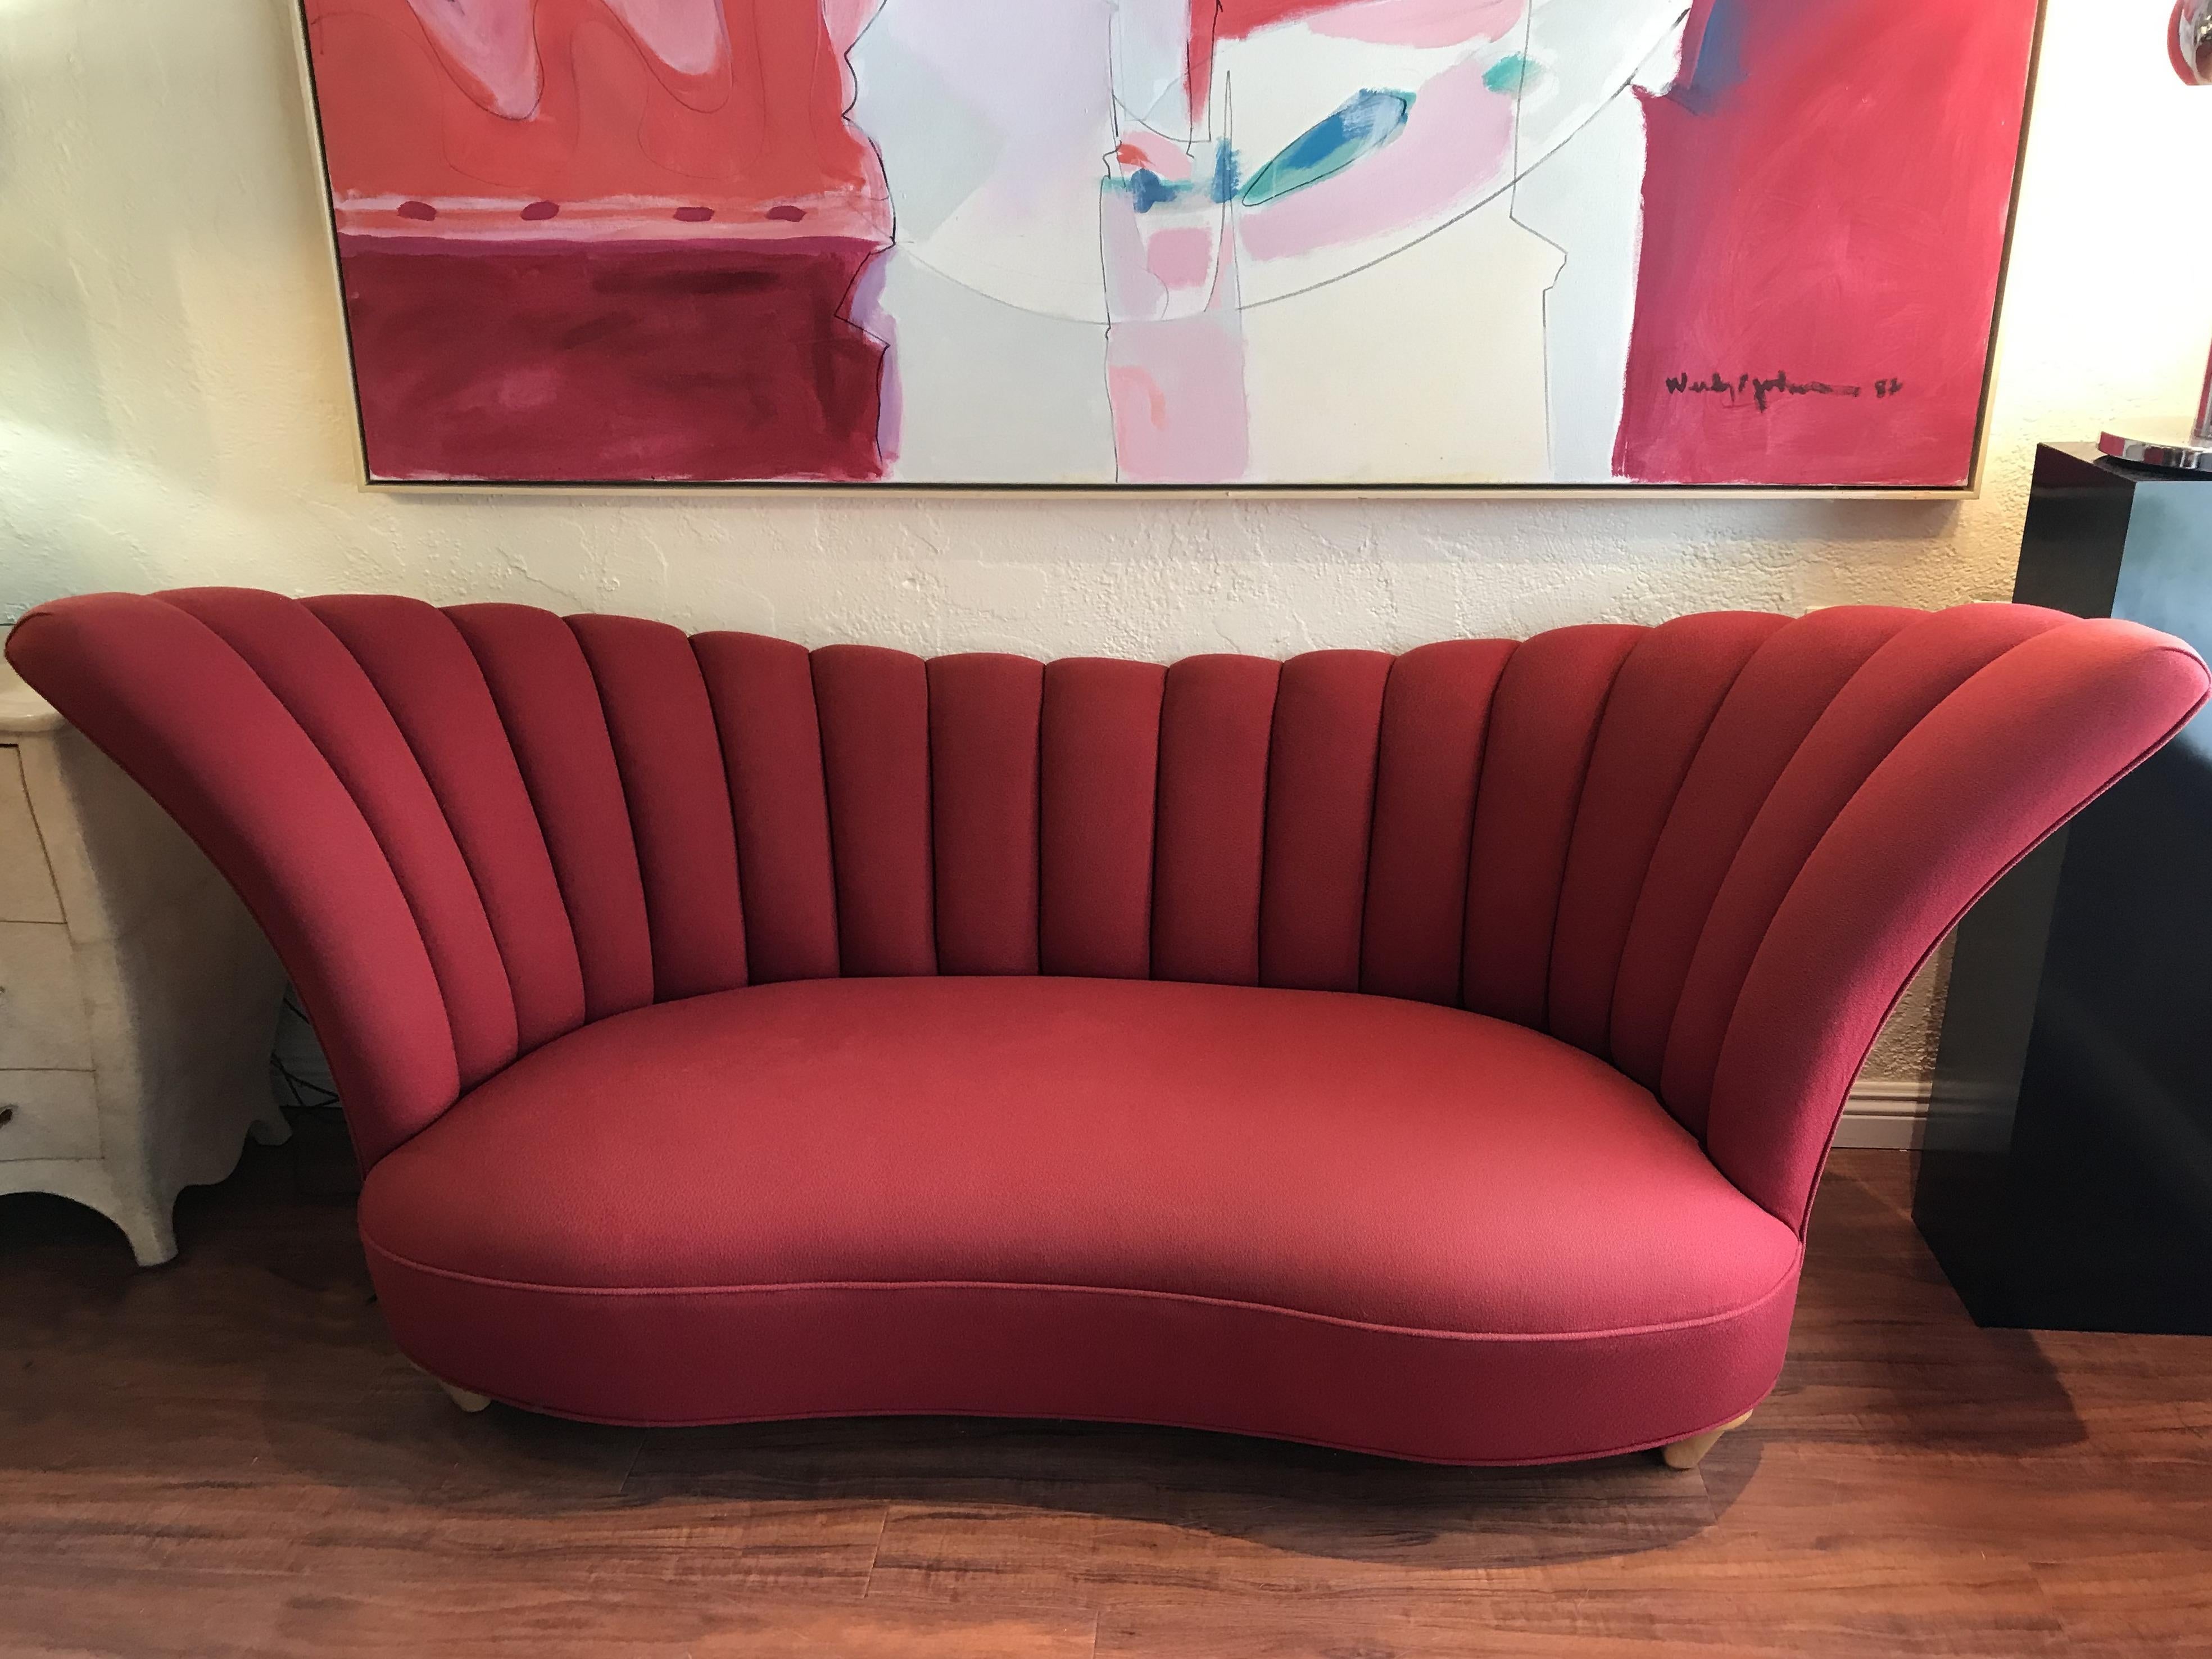 Glamorous fan back sofa upholstered with channels in raspberry color fabric sitting on sycamore conic shape front legs.
The depth mentioned in the dimensions is the total depth, the seat depth is 24